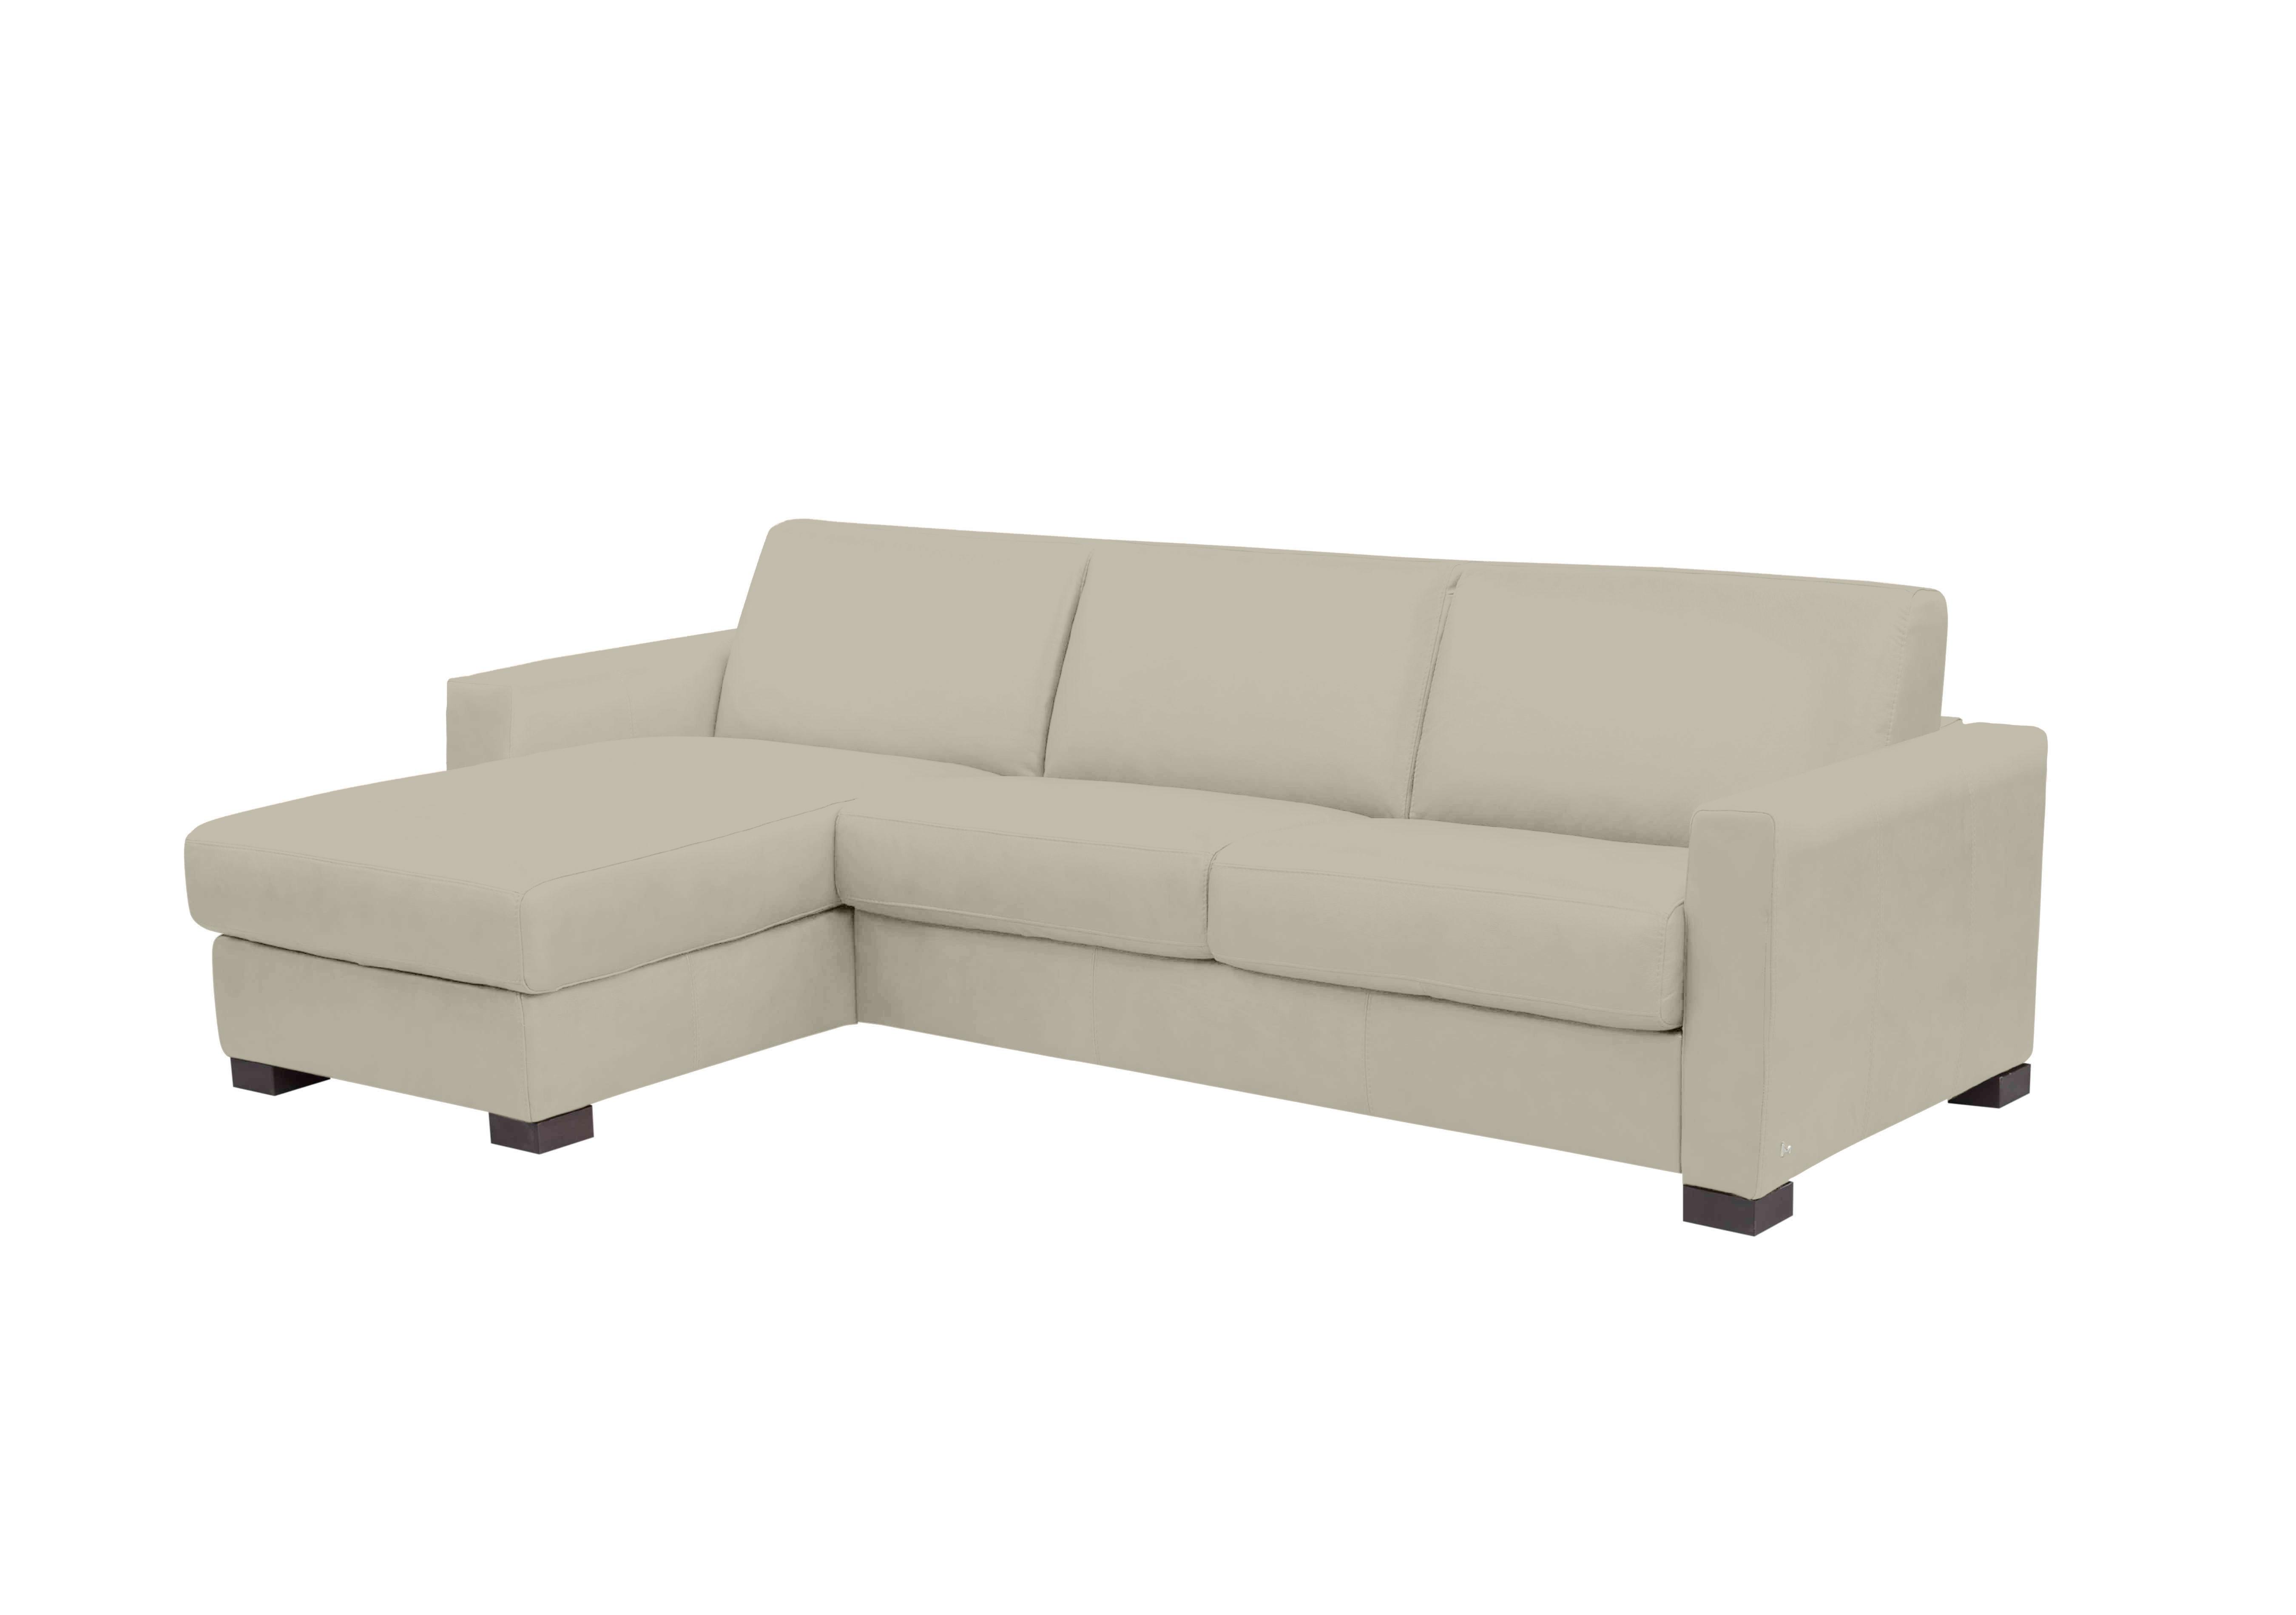 Alcova 3 Seater Leather Sofa Bed with Storage Chaise and Box Arms in Torello Tortora 328 on Furniture Village